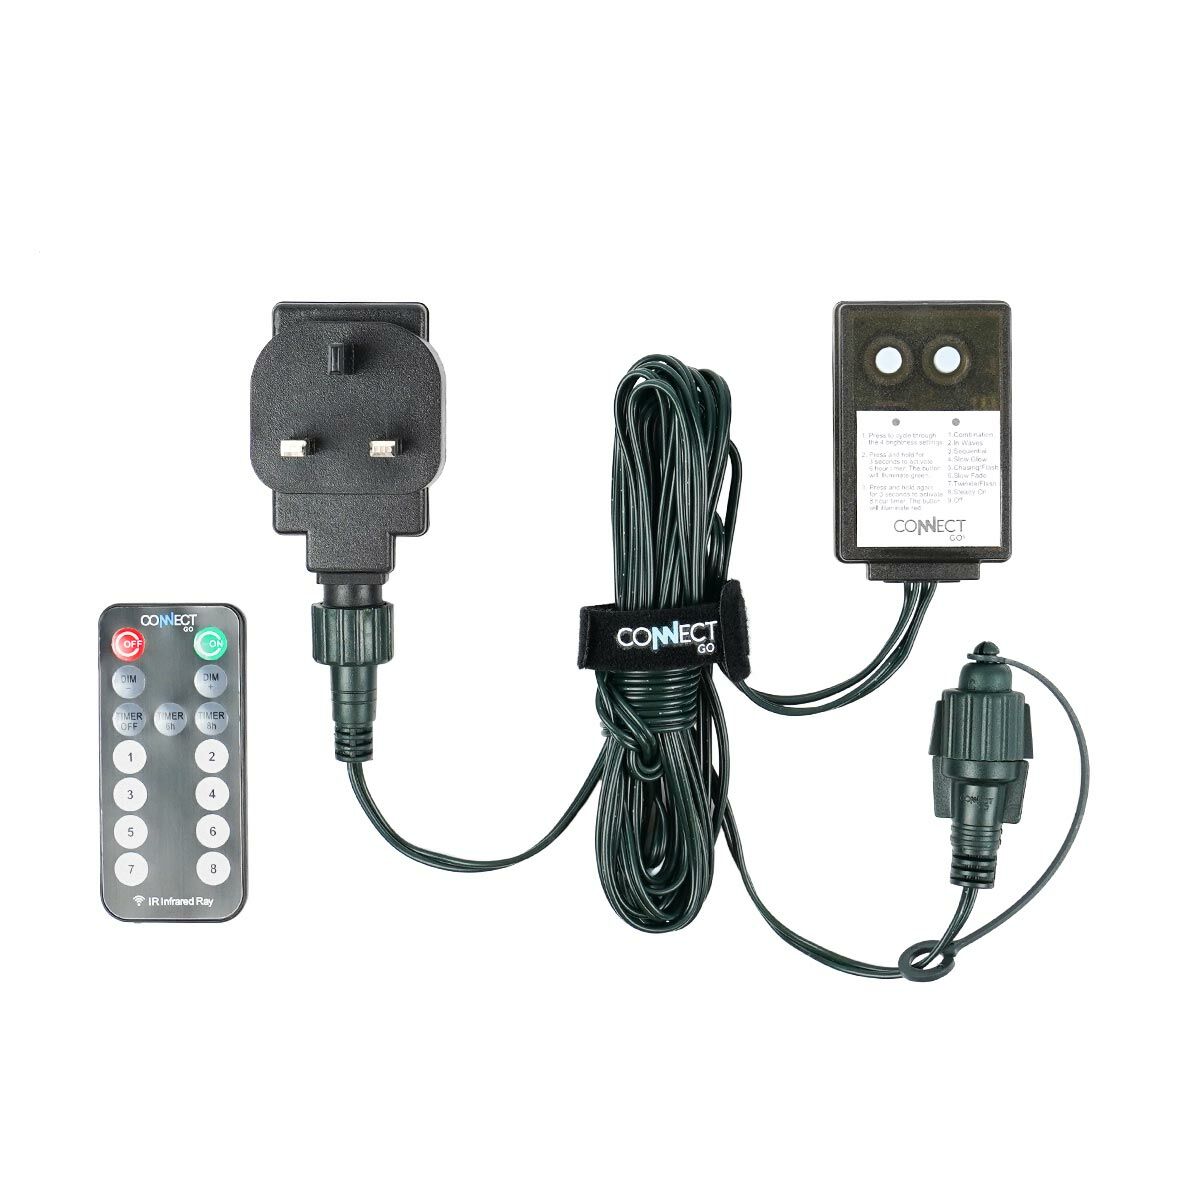 ConnectGo® Small Transformer, UK Plug, Green Cable with Remote Control image 1